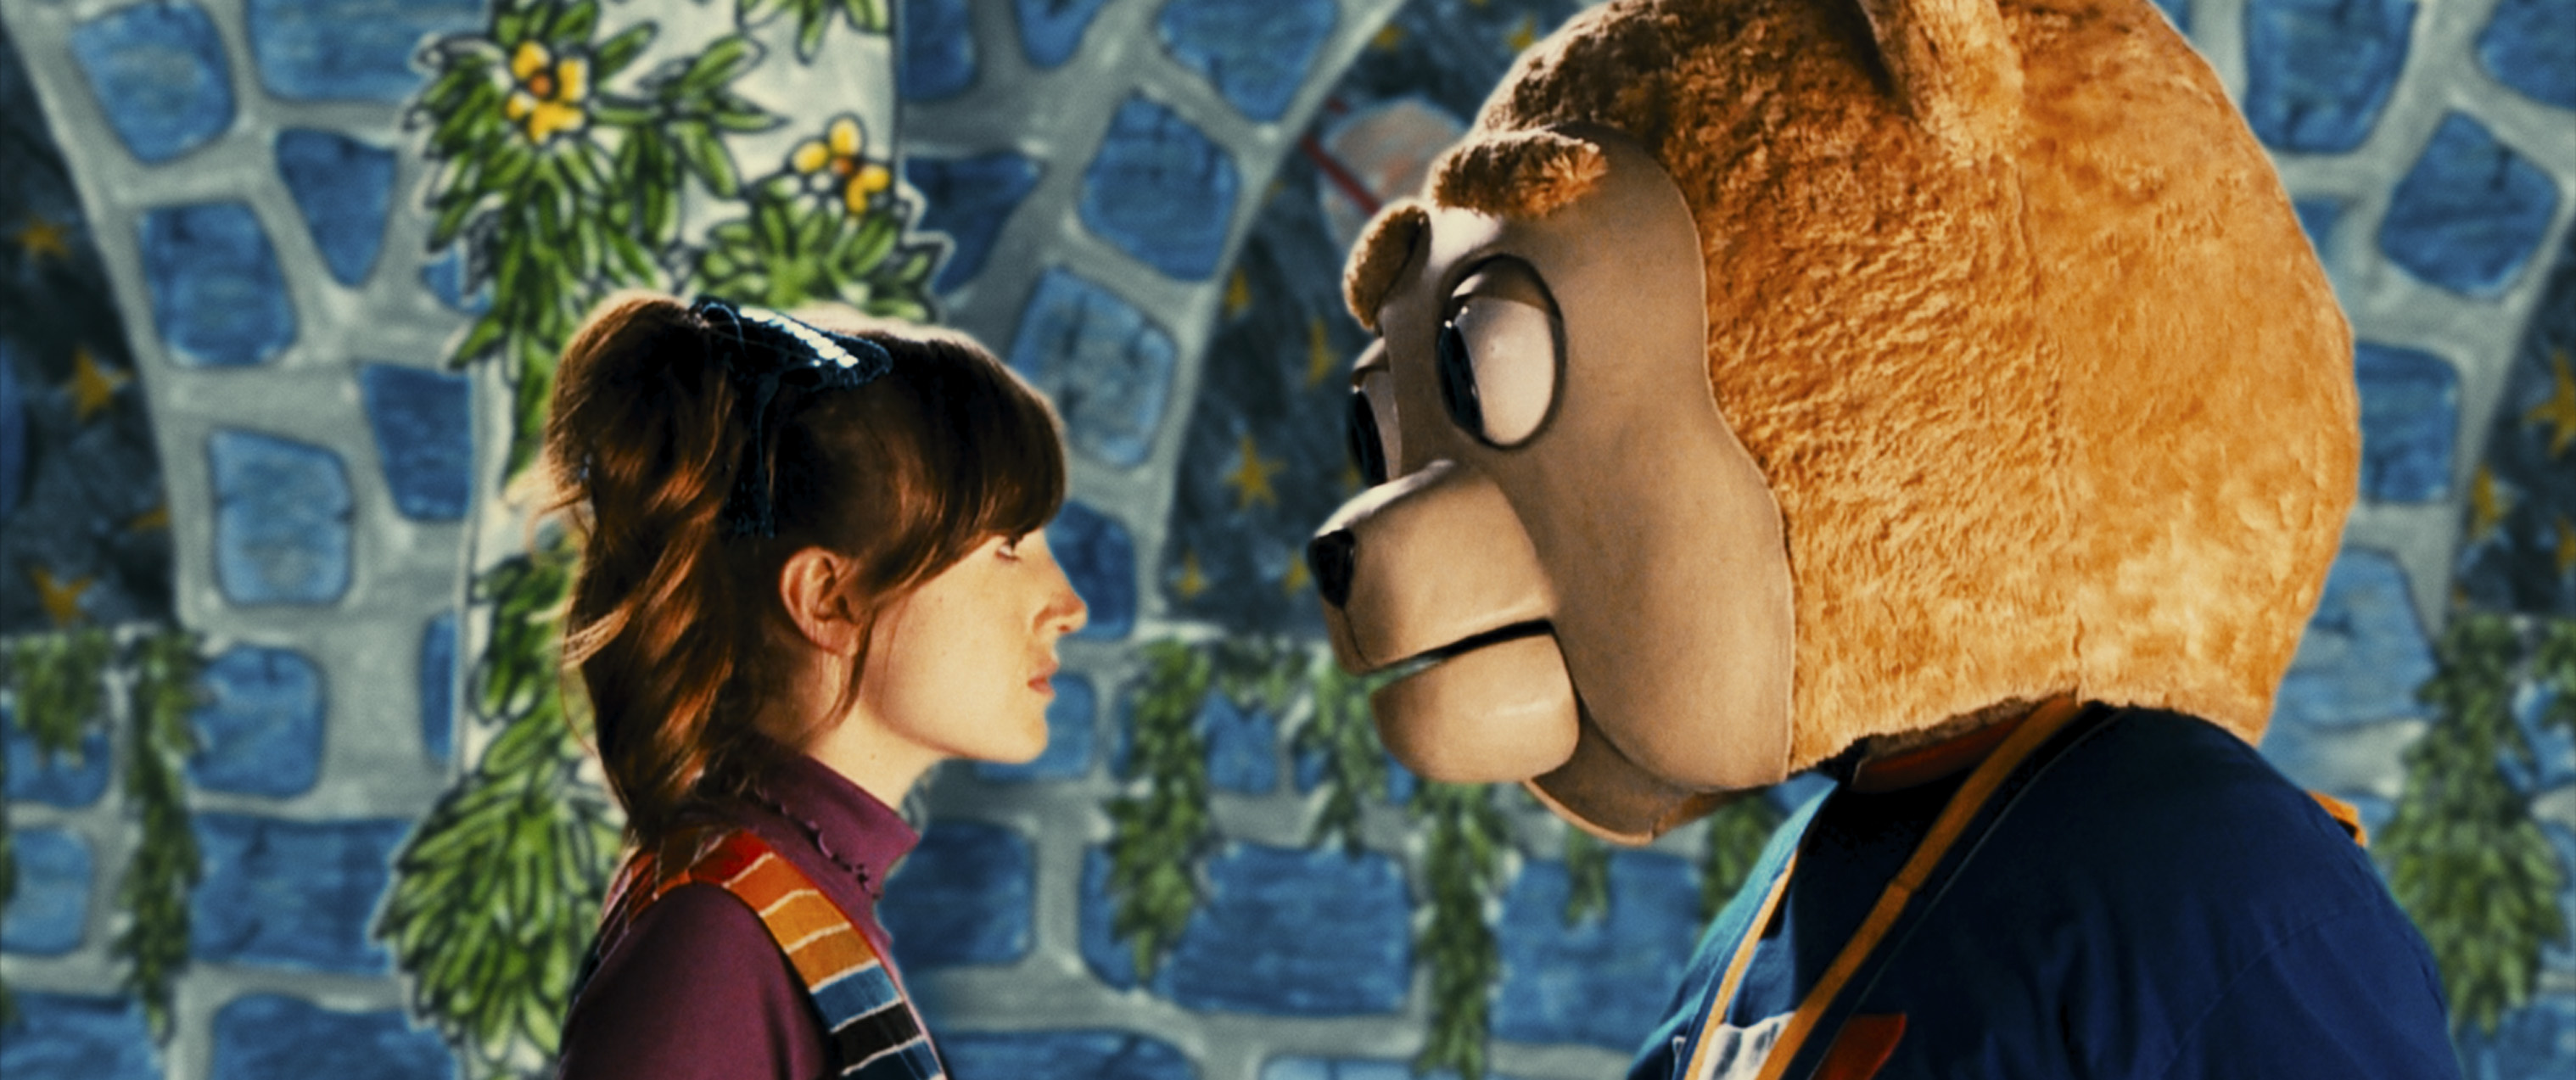 Brigsby Bear 2017 film, Indie comedy, Quirky storyline, Unconventional movie, 3040x1280 Dual Screen Desktop